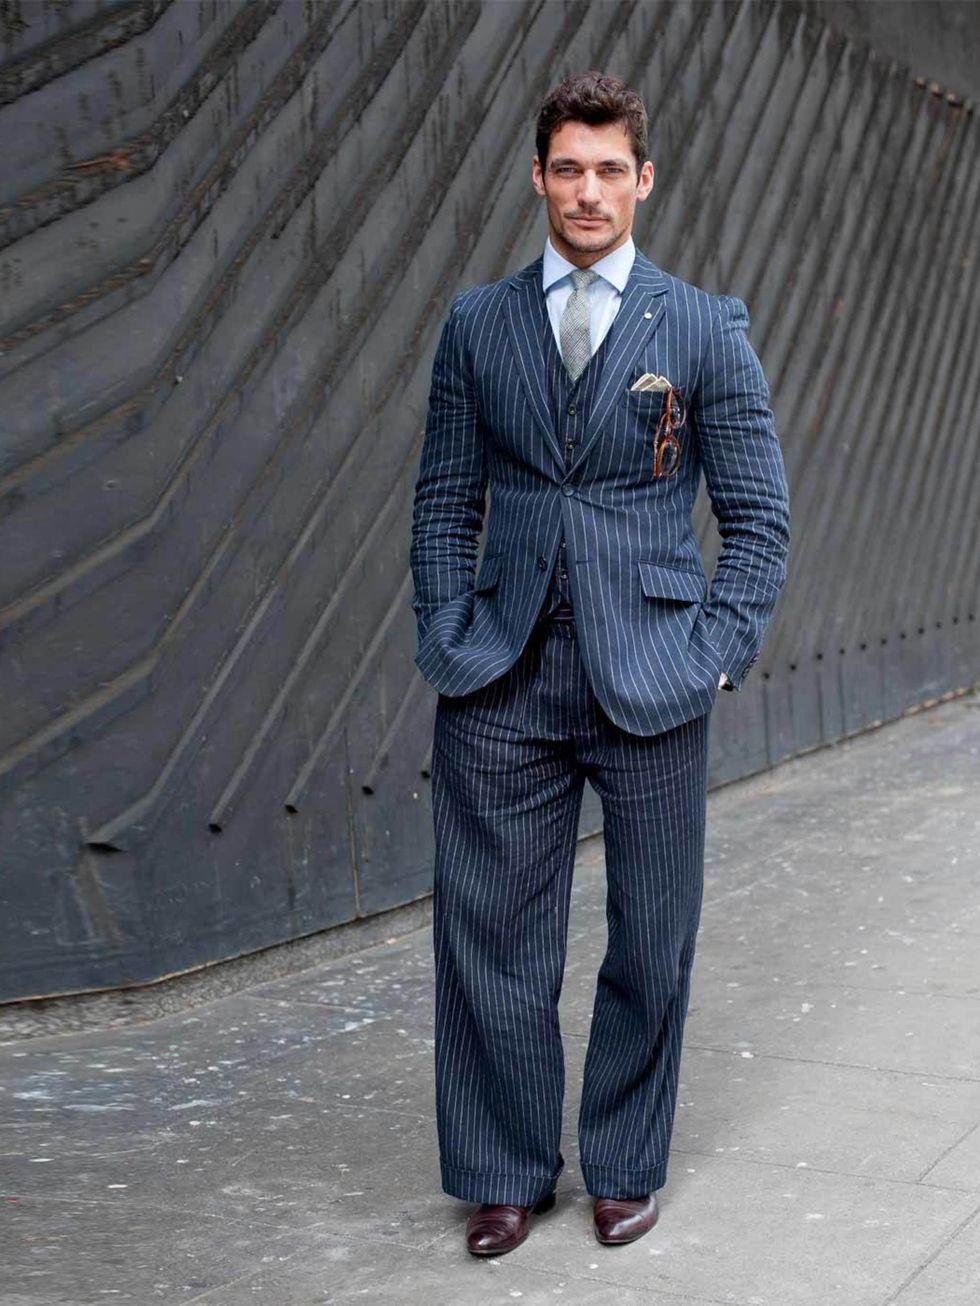 <p>David Gandy, Model. Ralph Lauren and Marks &amp; Spencer outfit, Russell &amp; Bromley shoes.</p><p>Photos by Kirstin Sinclair.</p>